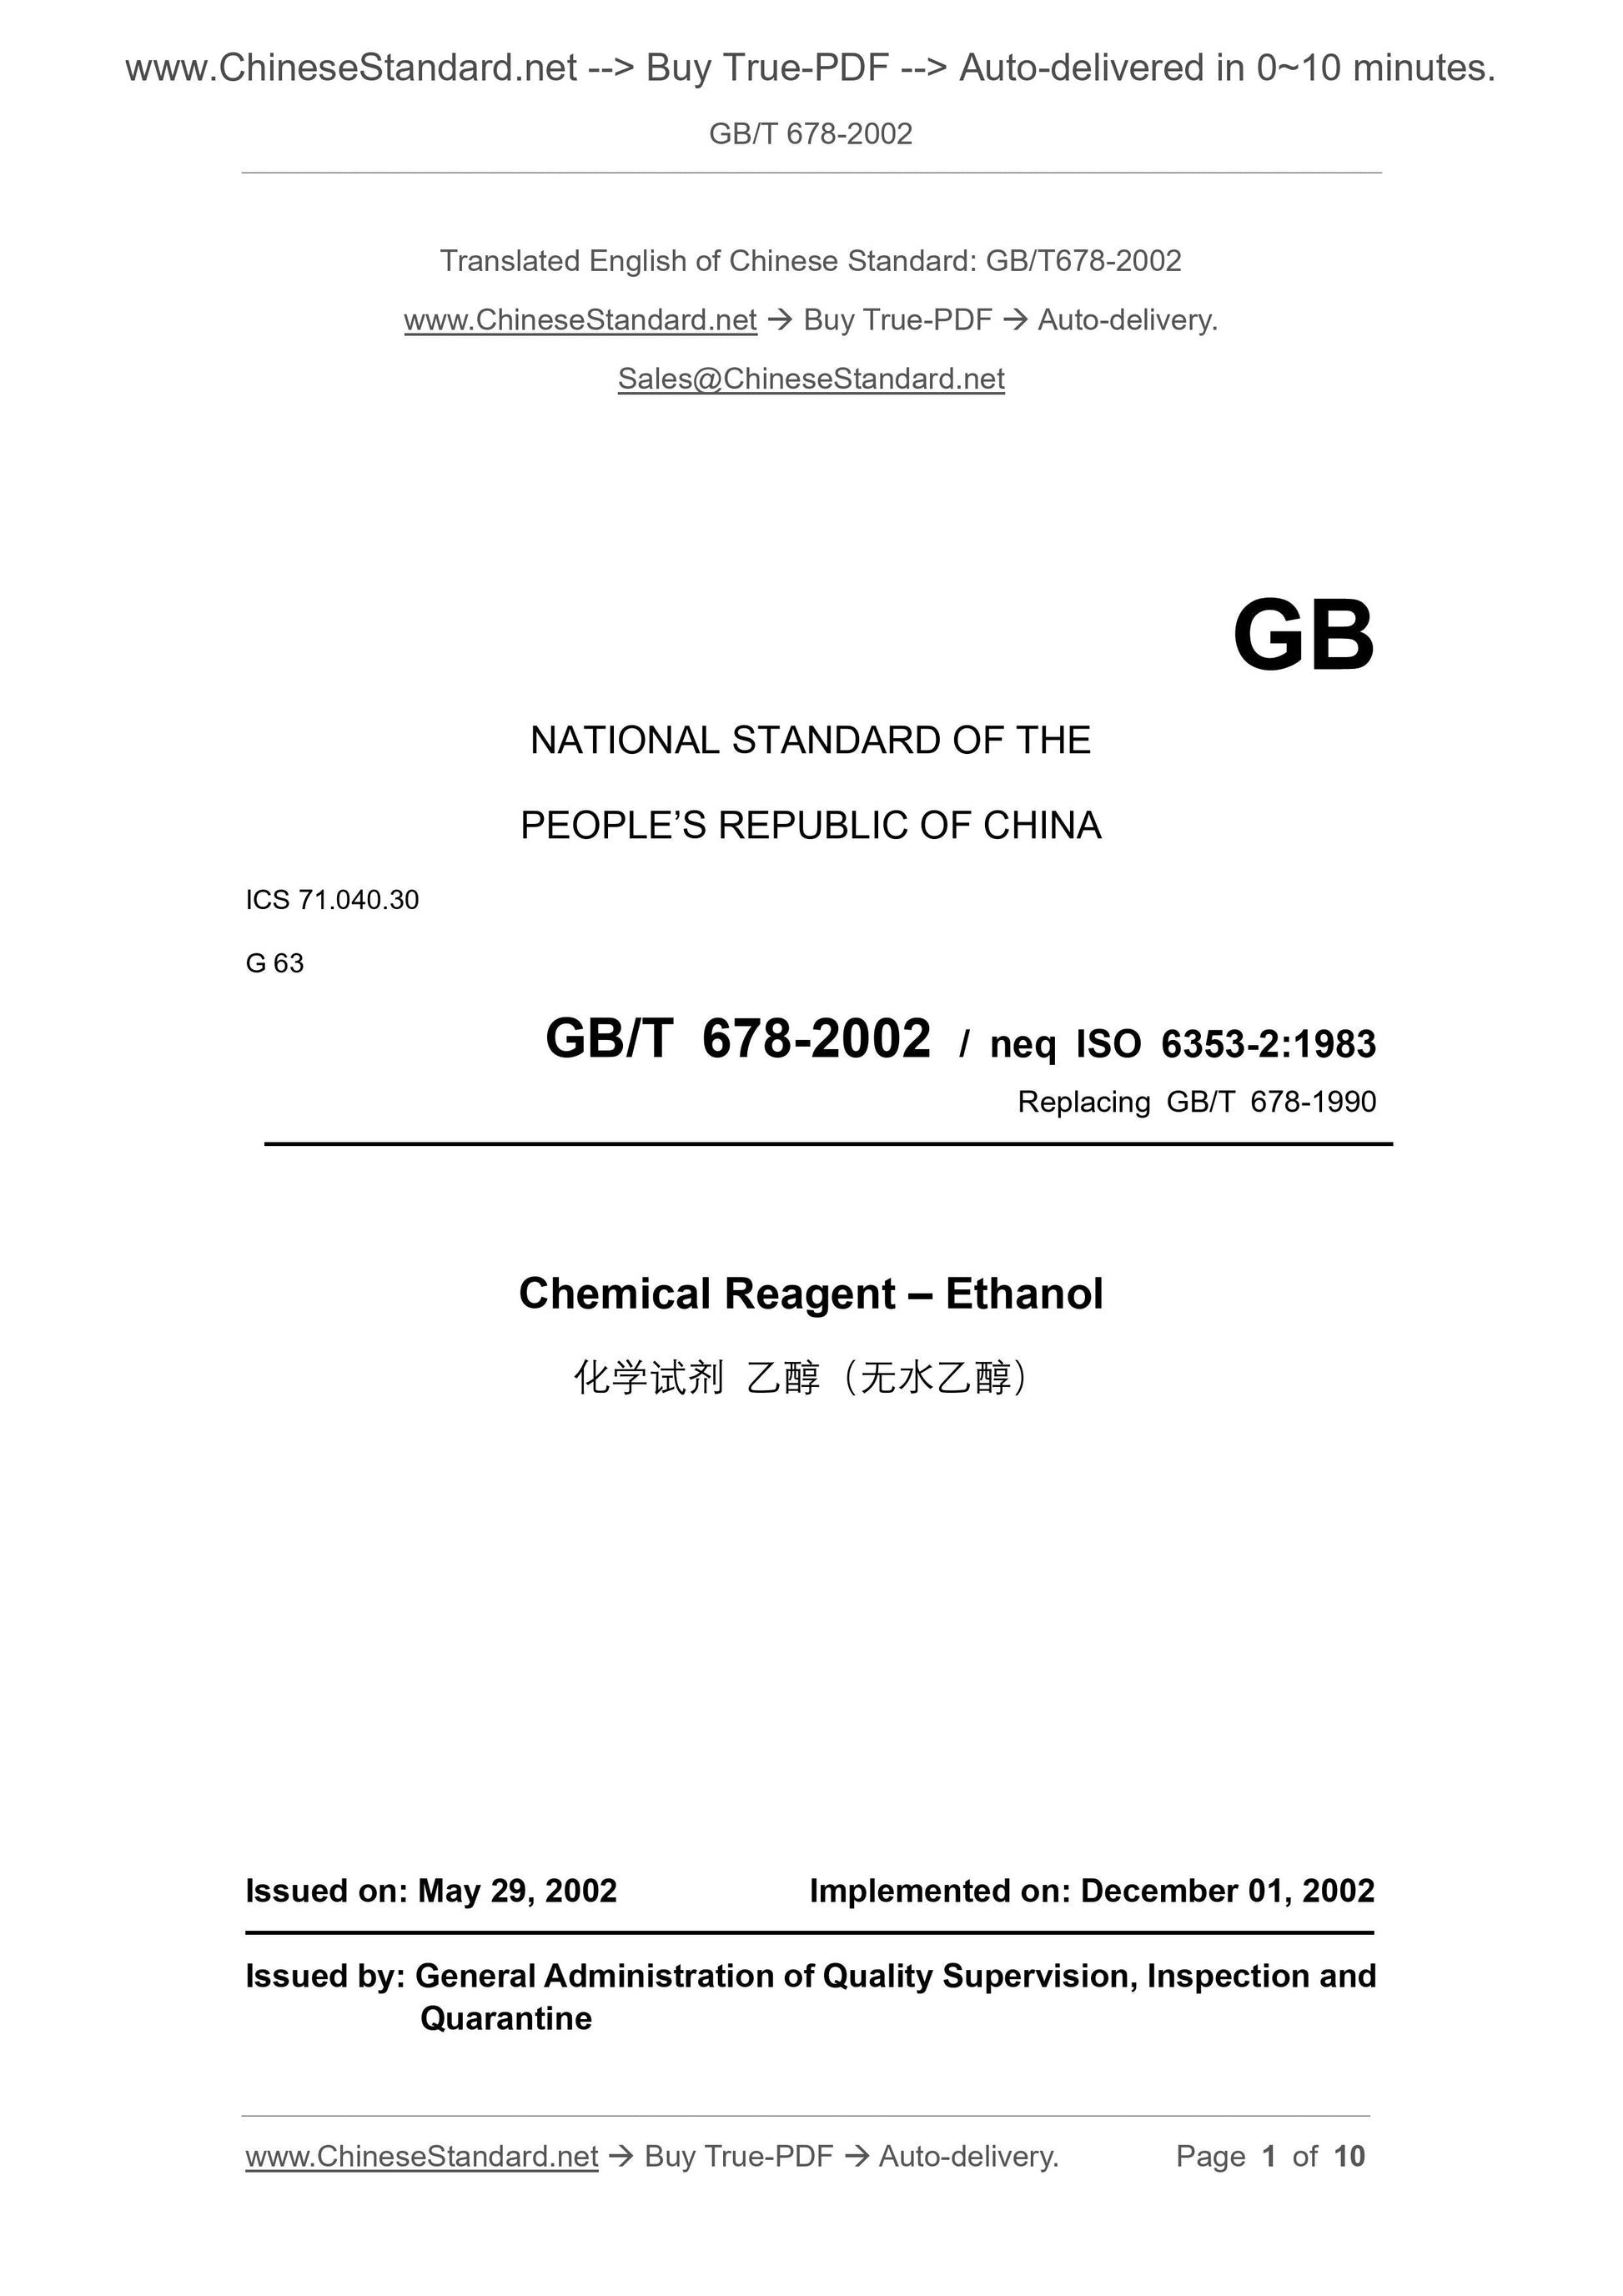 GB/T 678-2002 Page 1